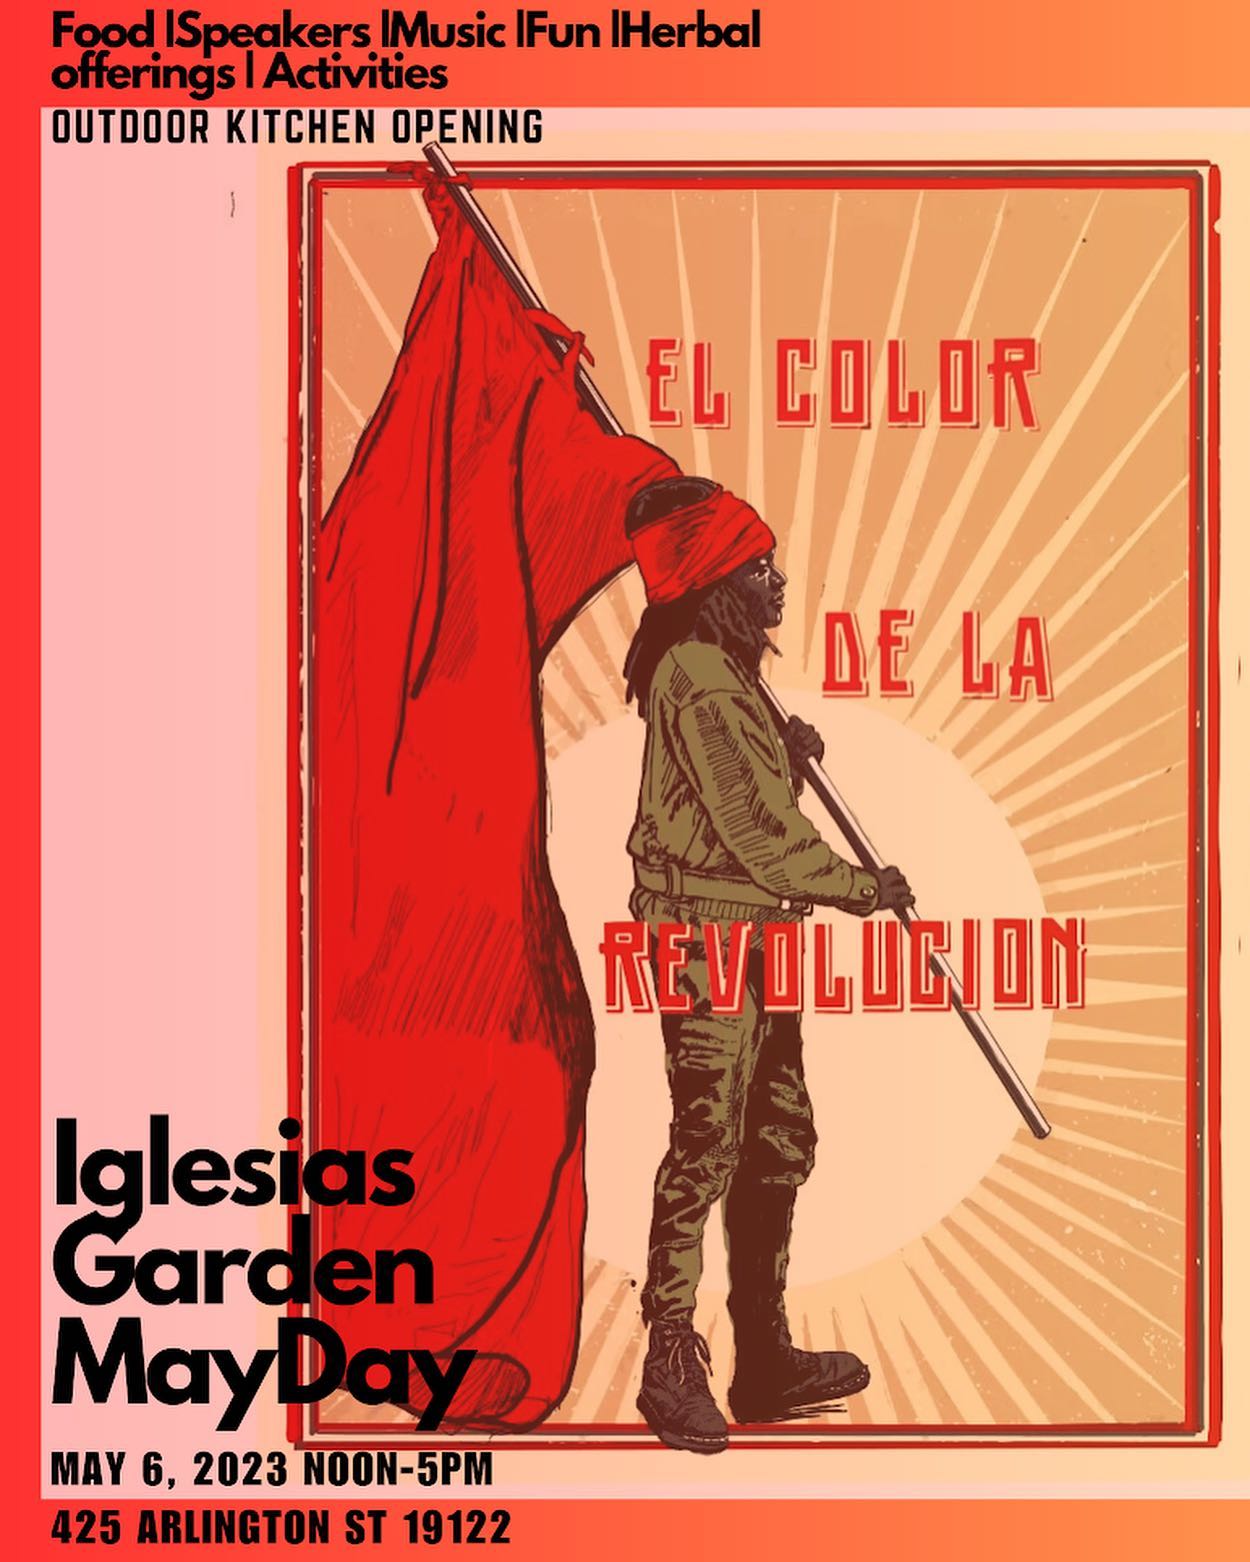 Illustration of a person wearing green fatigues and a red hair wrap, carrying a red flag alongside the text "El clor de la revolucion." The flyer text reads as follows: Food | Speakers | Music | Fun | Herbal offerings | Activities | Outdoor kitchen opening / Iglesias Garden May Day / May 6, 2023 NOON–5PM / 425 Arlington St. 19122